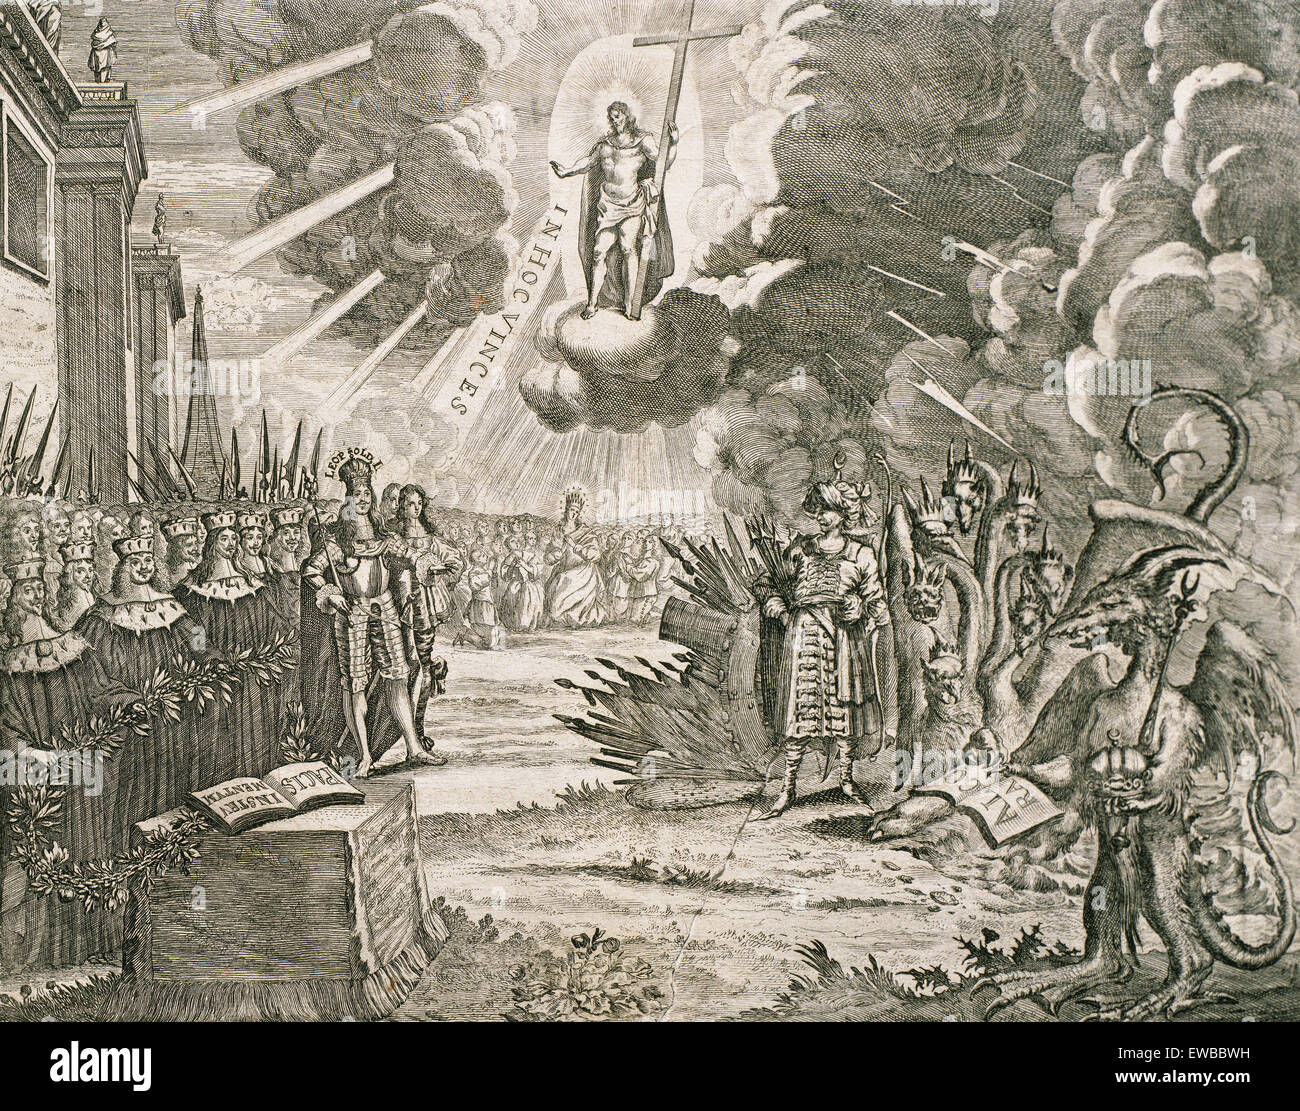 Treaty of Karlowitz. Signed on January 26, 1699 in the Serbian city of Karlowitz (Sremski Karlovci current) between the Ottoman Empire and the Holy League of 1684. Engraving. Stock Photo